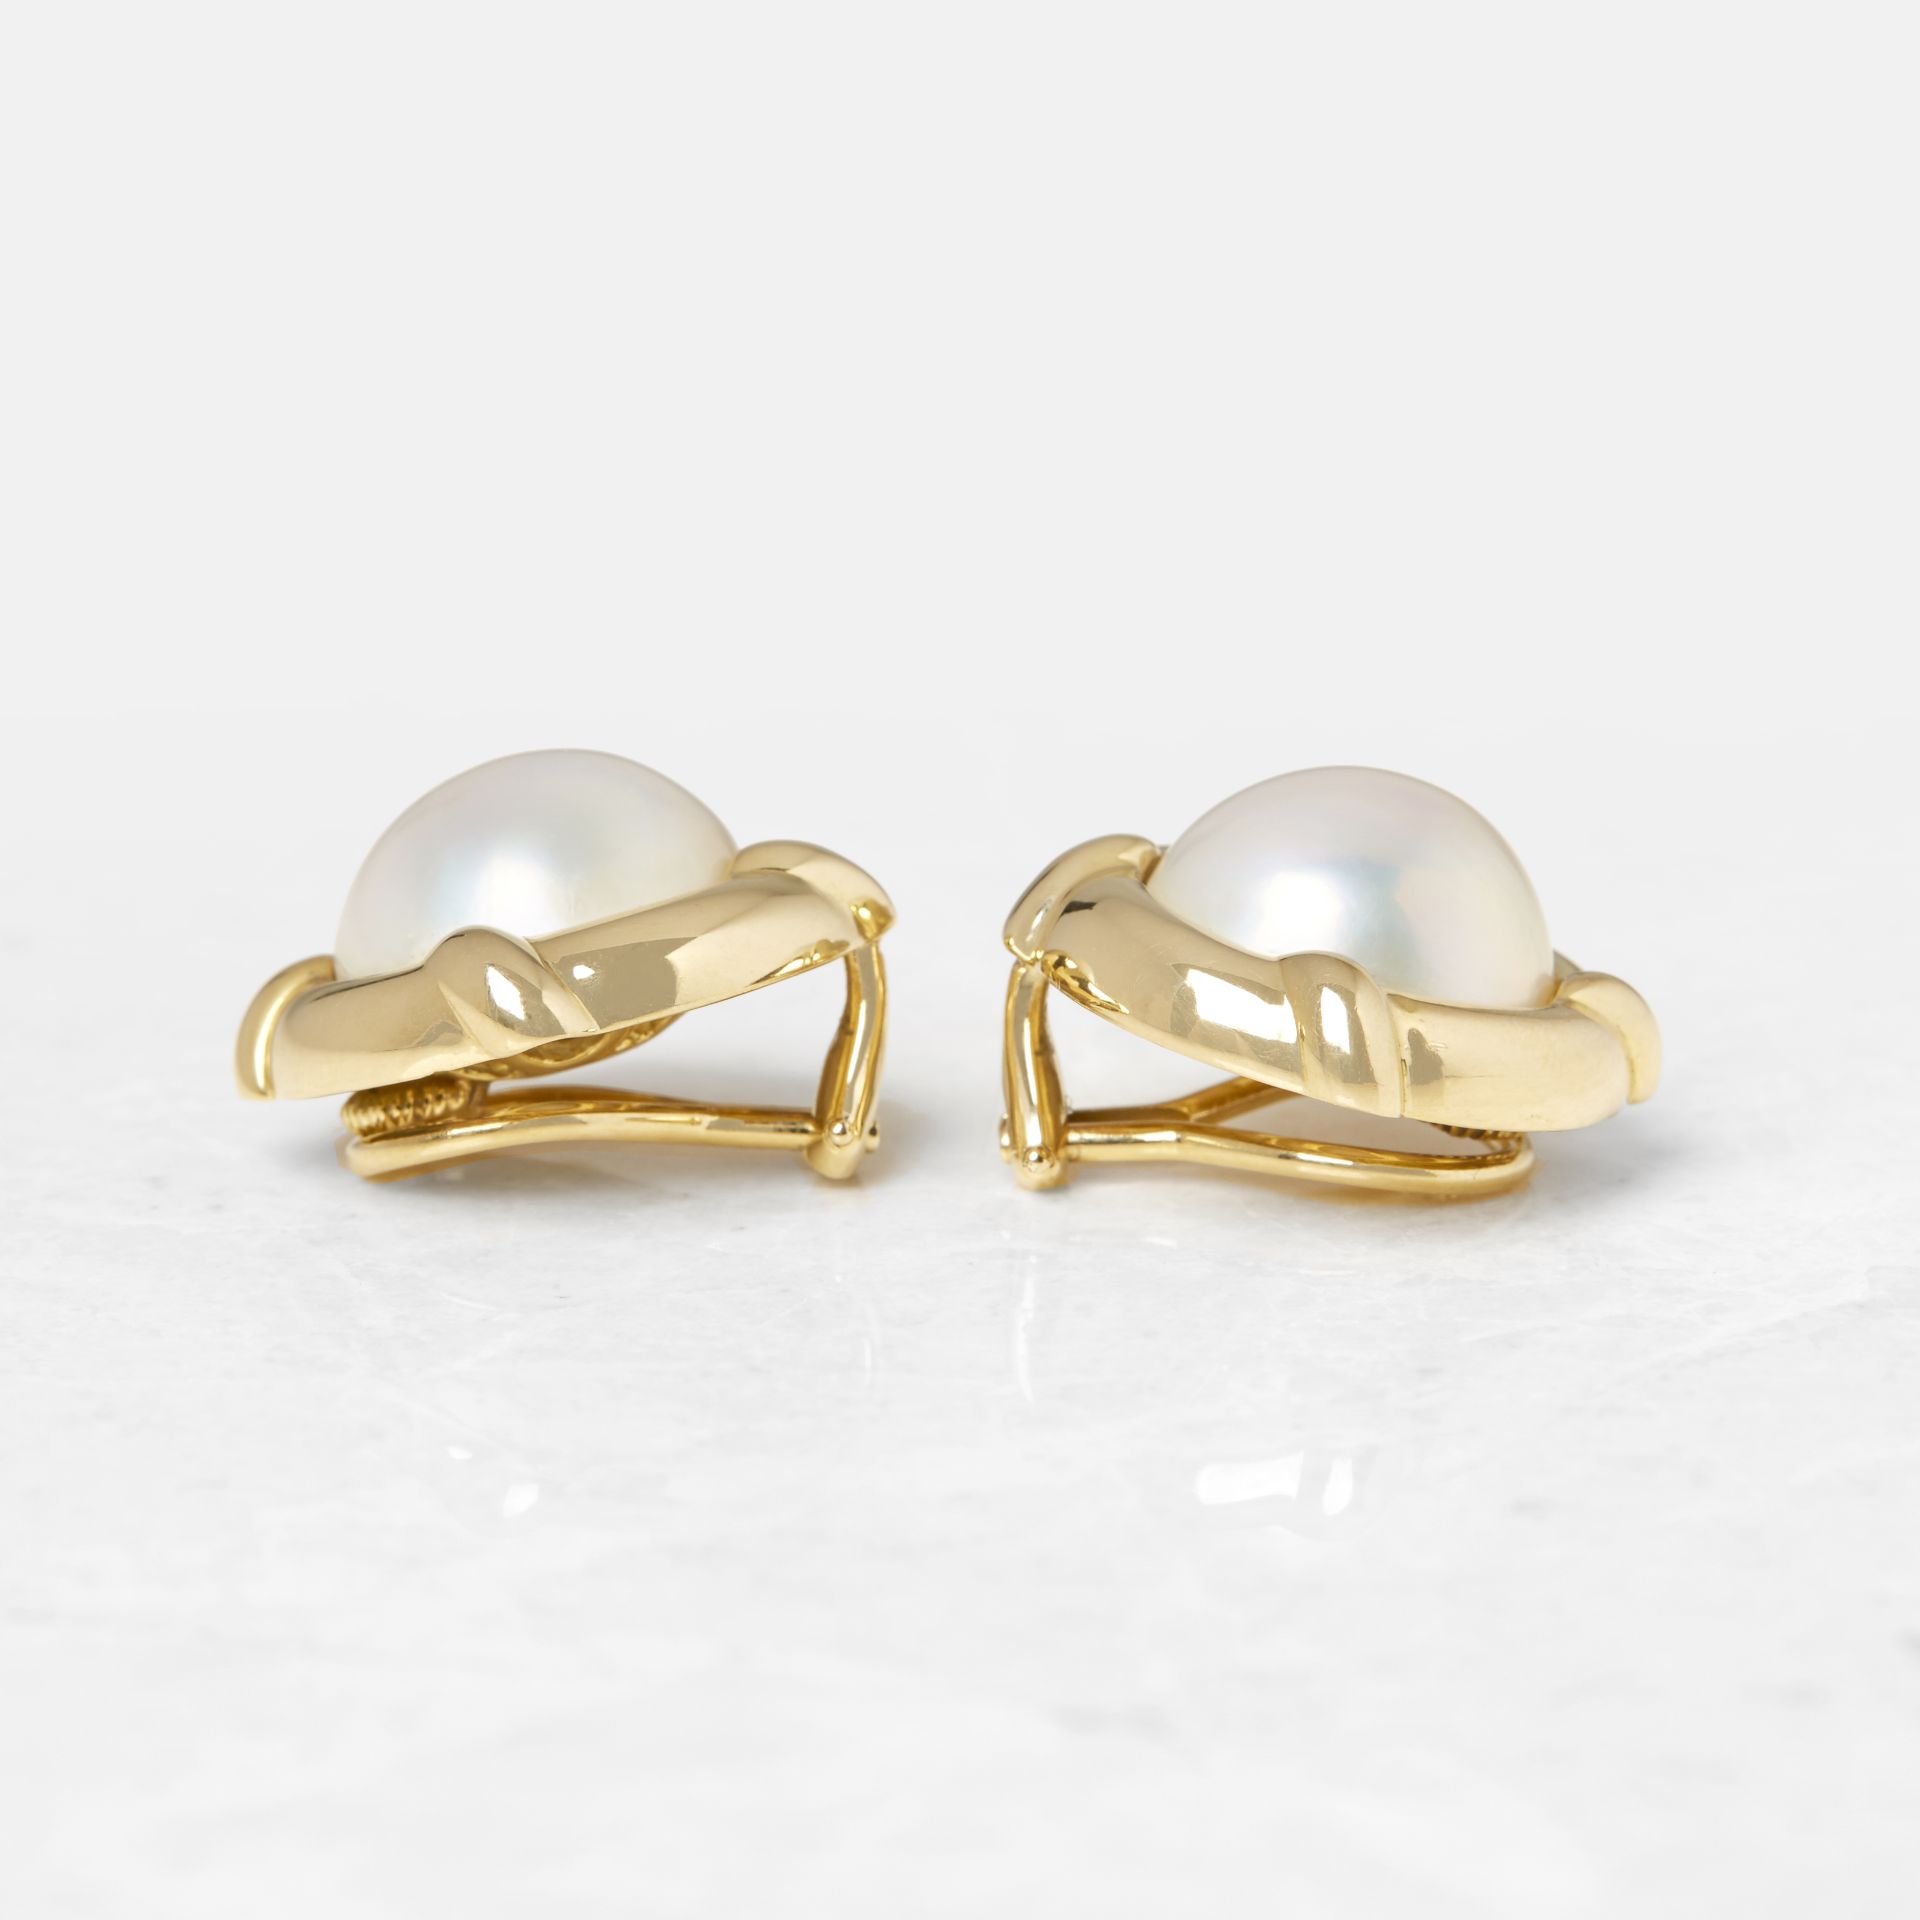 Tiffany & Co. 18k Yellow Gold Mabe Pearl Earrings - Image 10 of 15